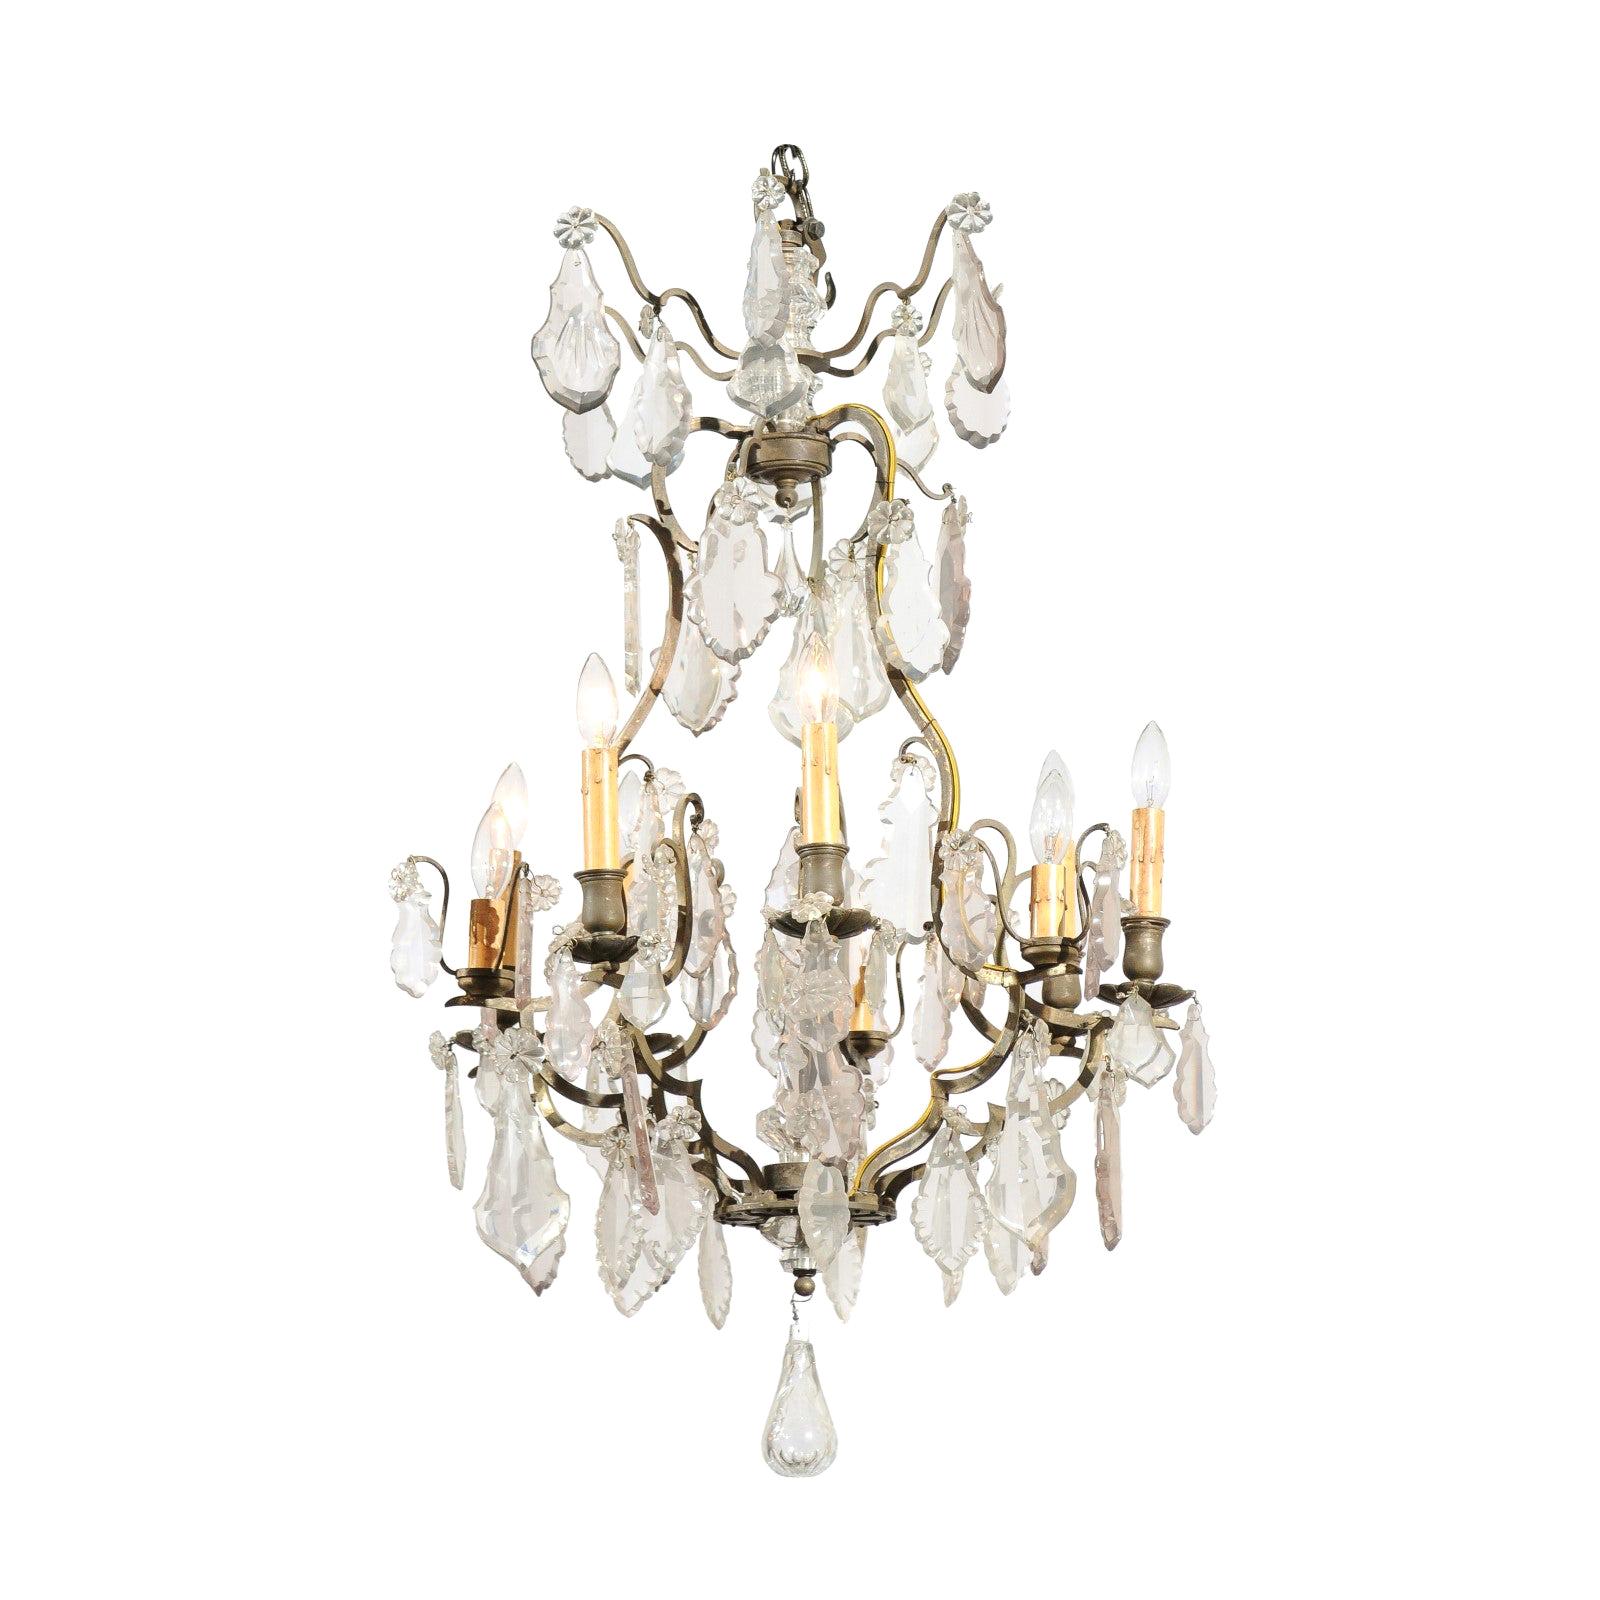 French Louis-Philippe Period 1840s Eight-Light Crystal Chandelier with Finial For Sale